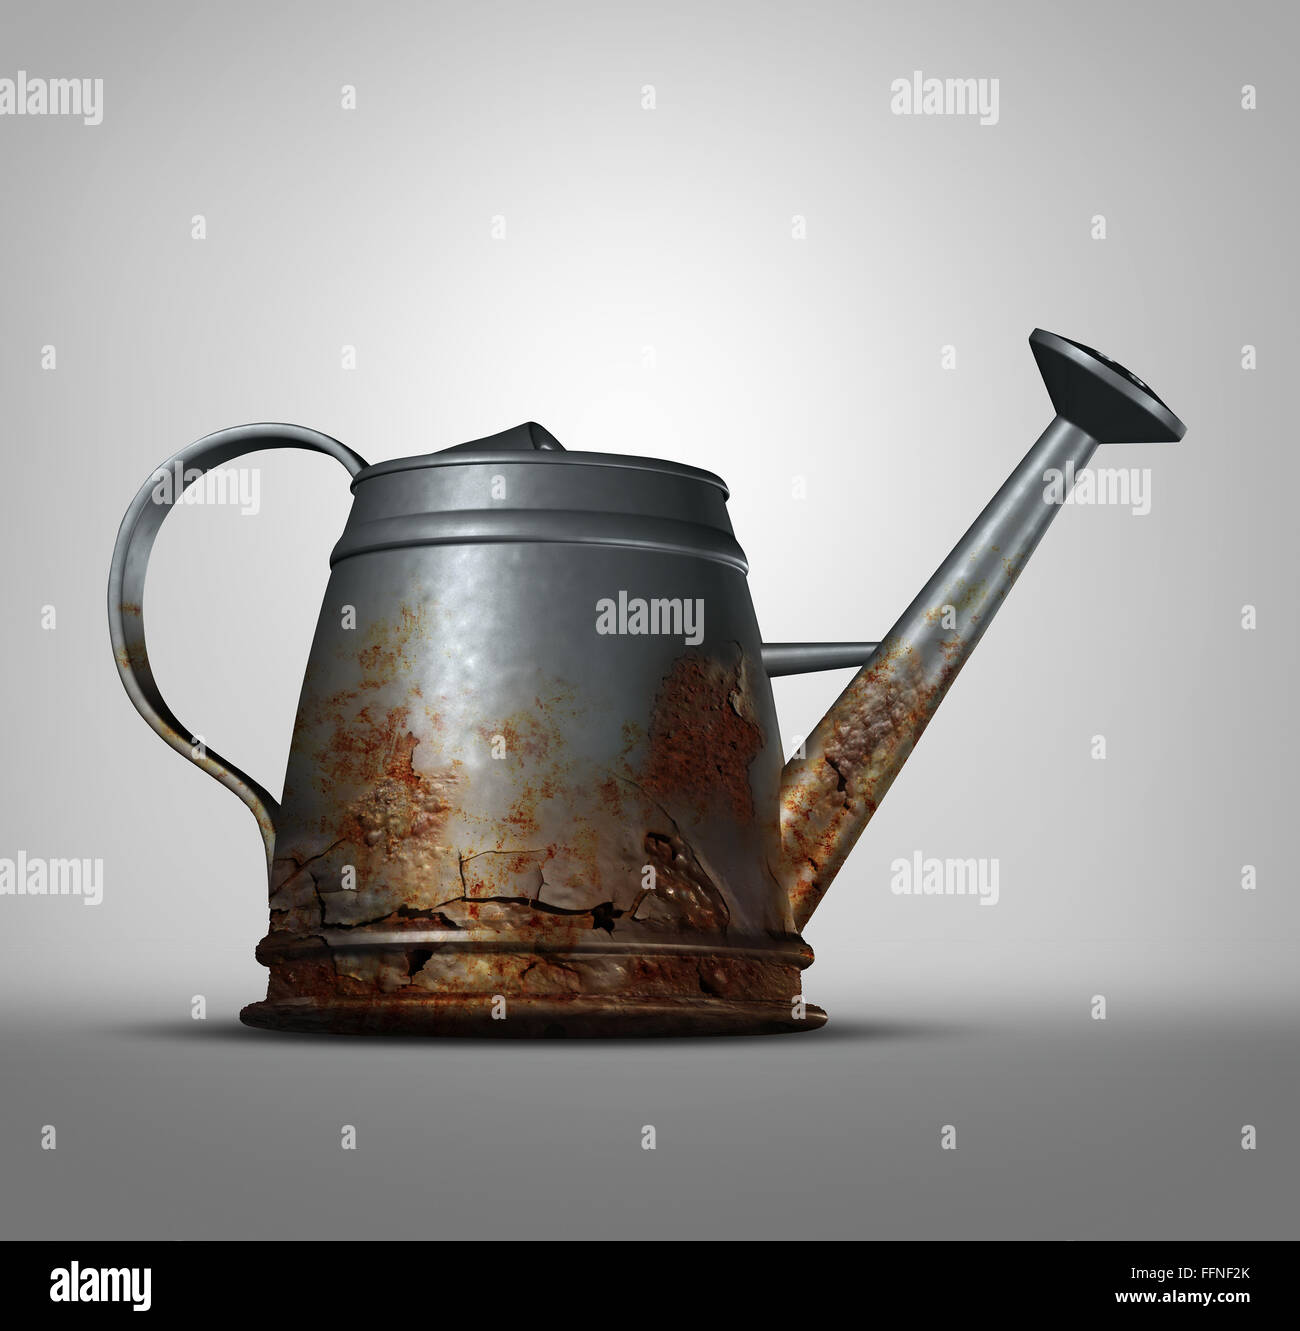 Water problem as a watering can that is corroded and decaying with with rust due to neglected weathering and oxidation as a conservation and health metaphor for clean drinking liquid free from lead and poison. Stock Photo